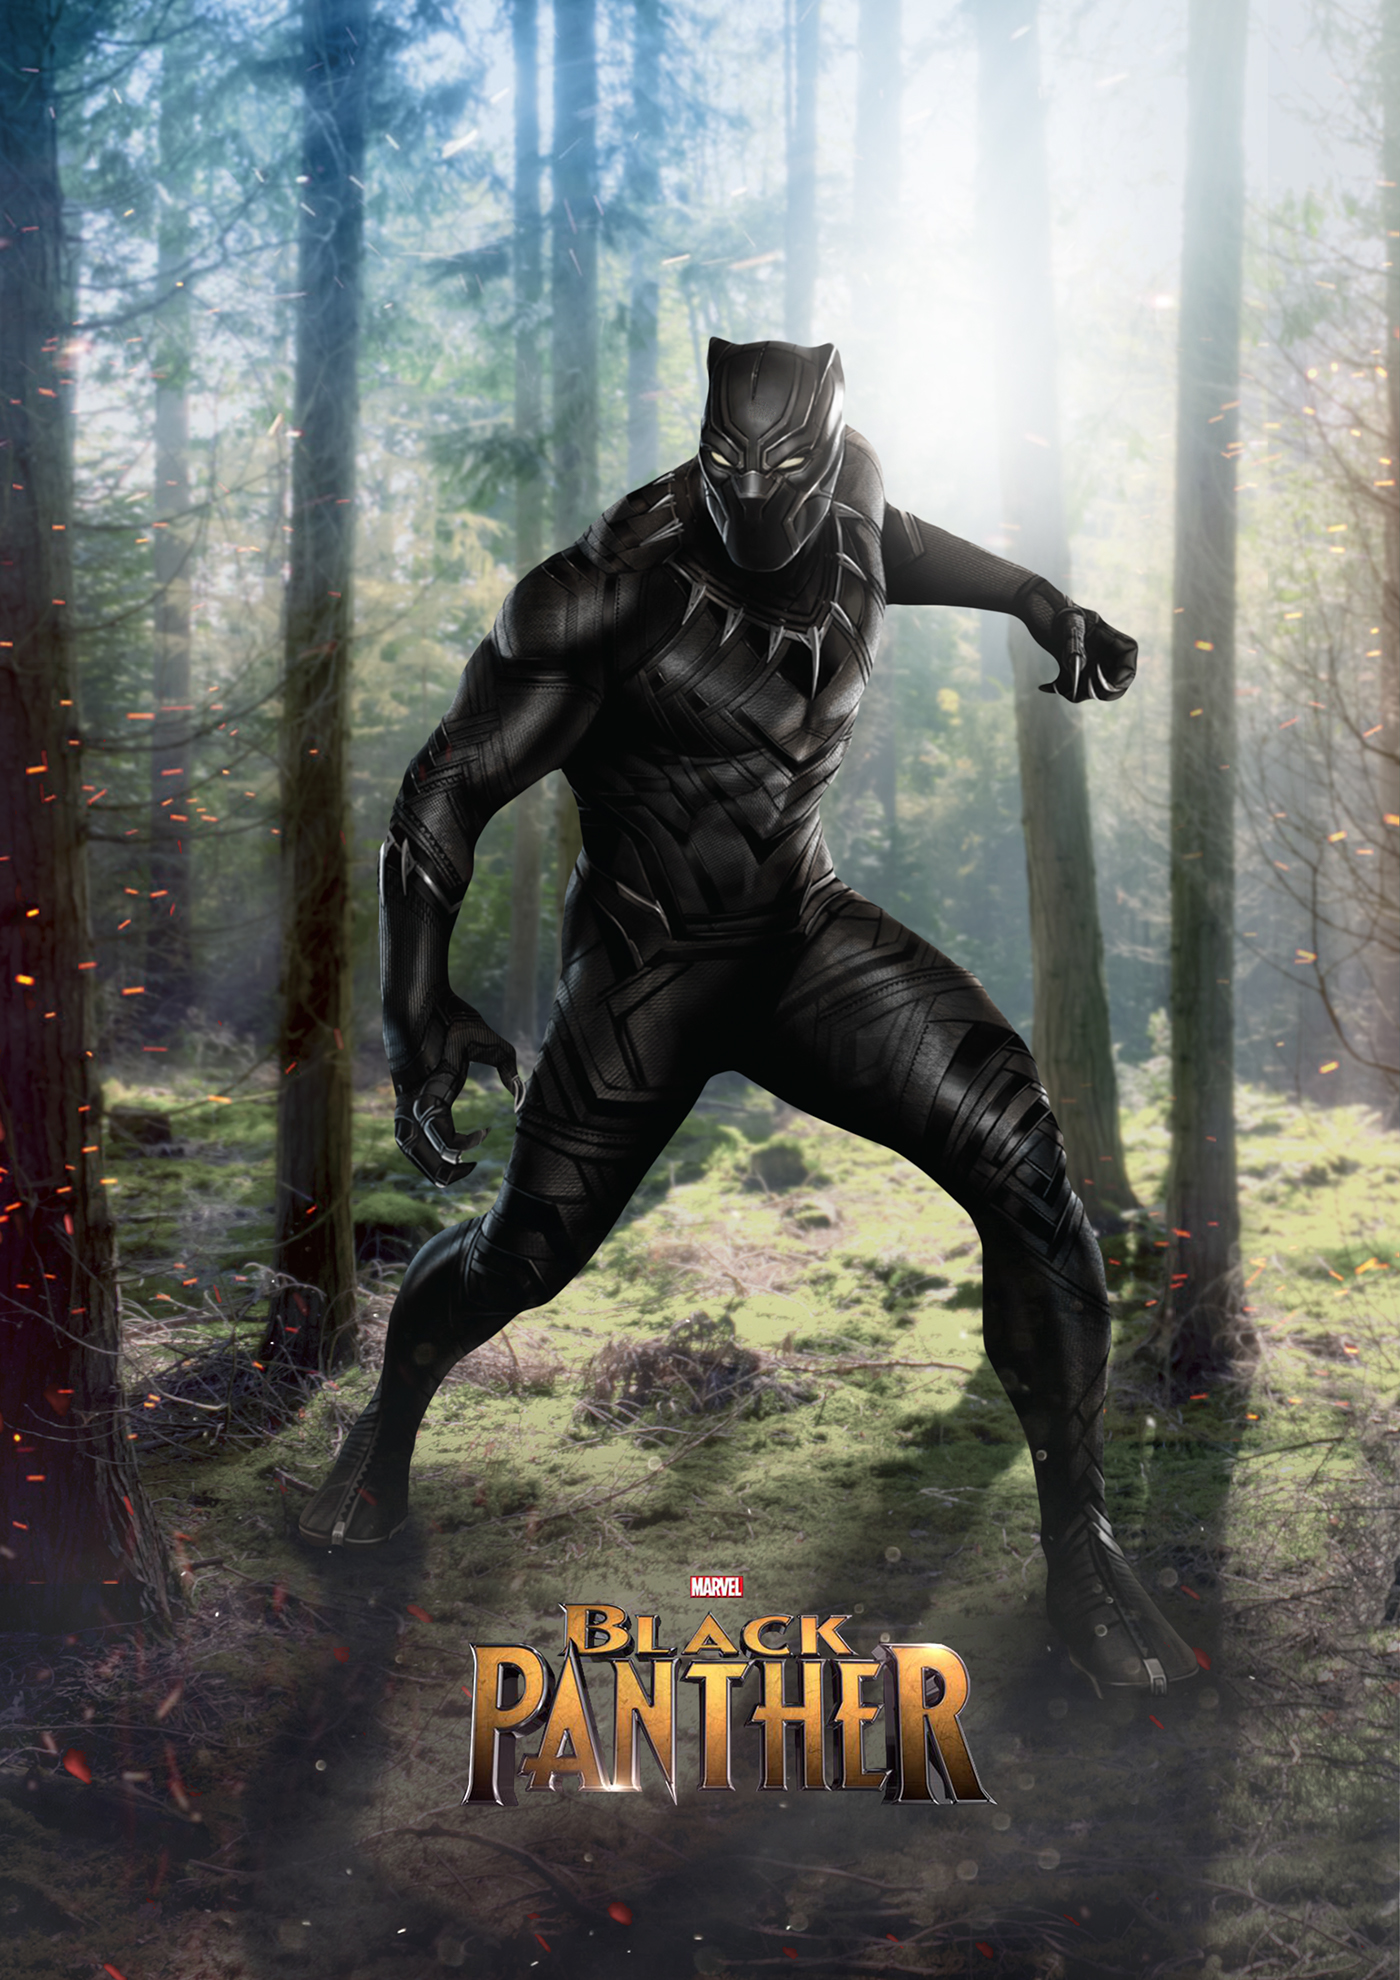 black panther movie poster concept on behance